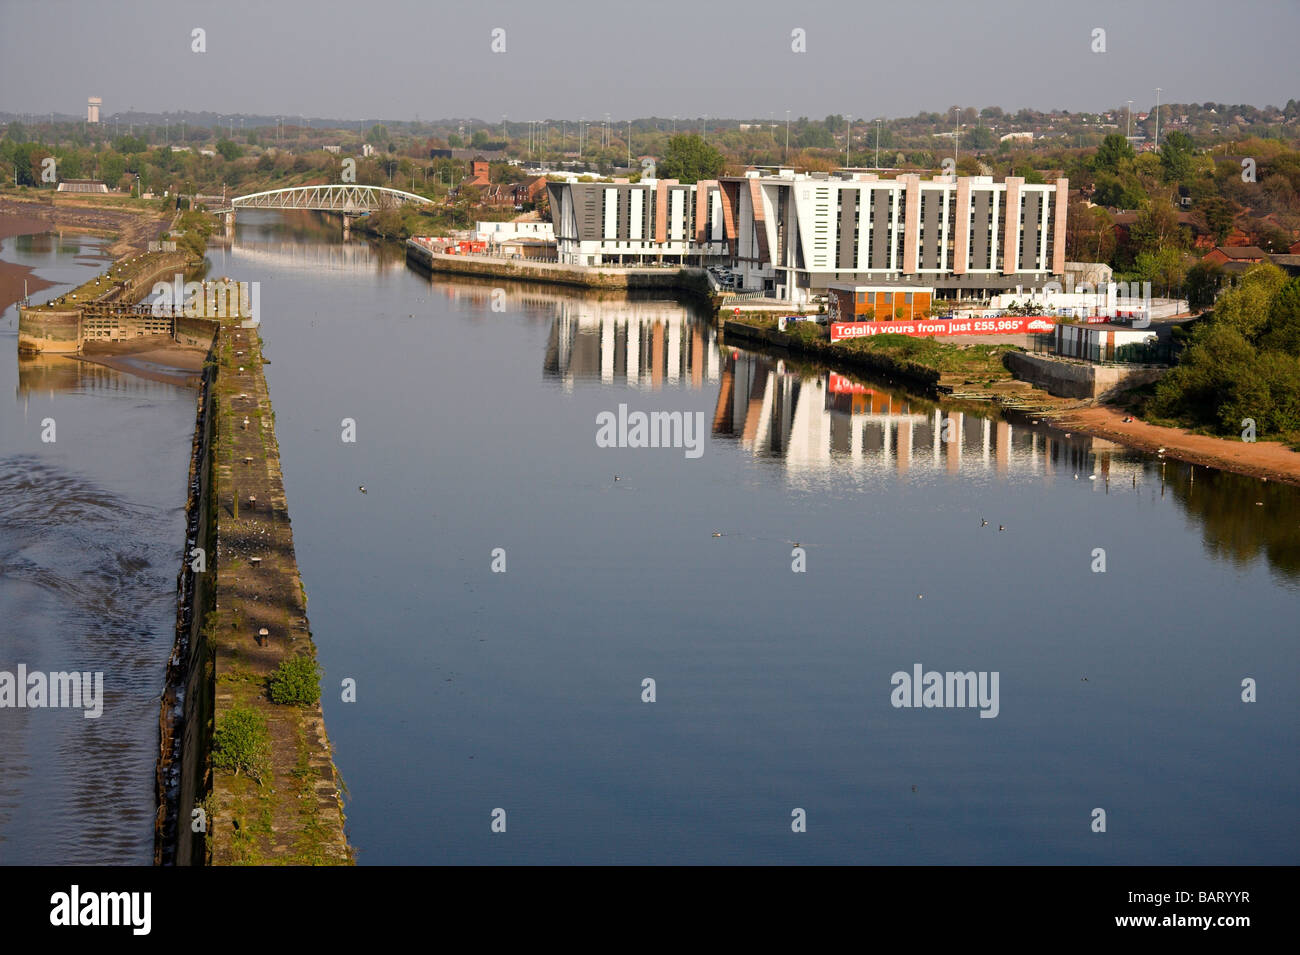 Modern apartments on the Manchester Ship Canal, taken from the Runcorn Bridge, Widnes, Cheshire, UK Stock Photo